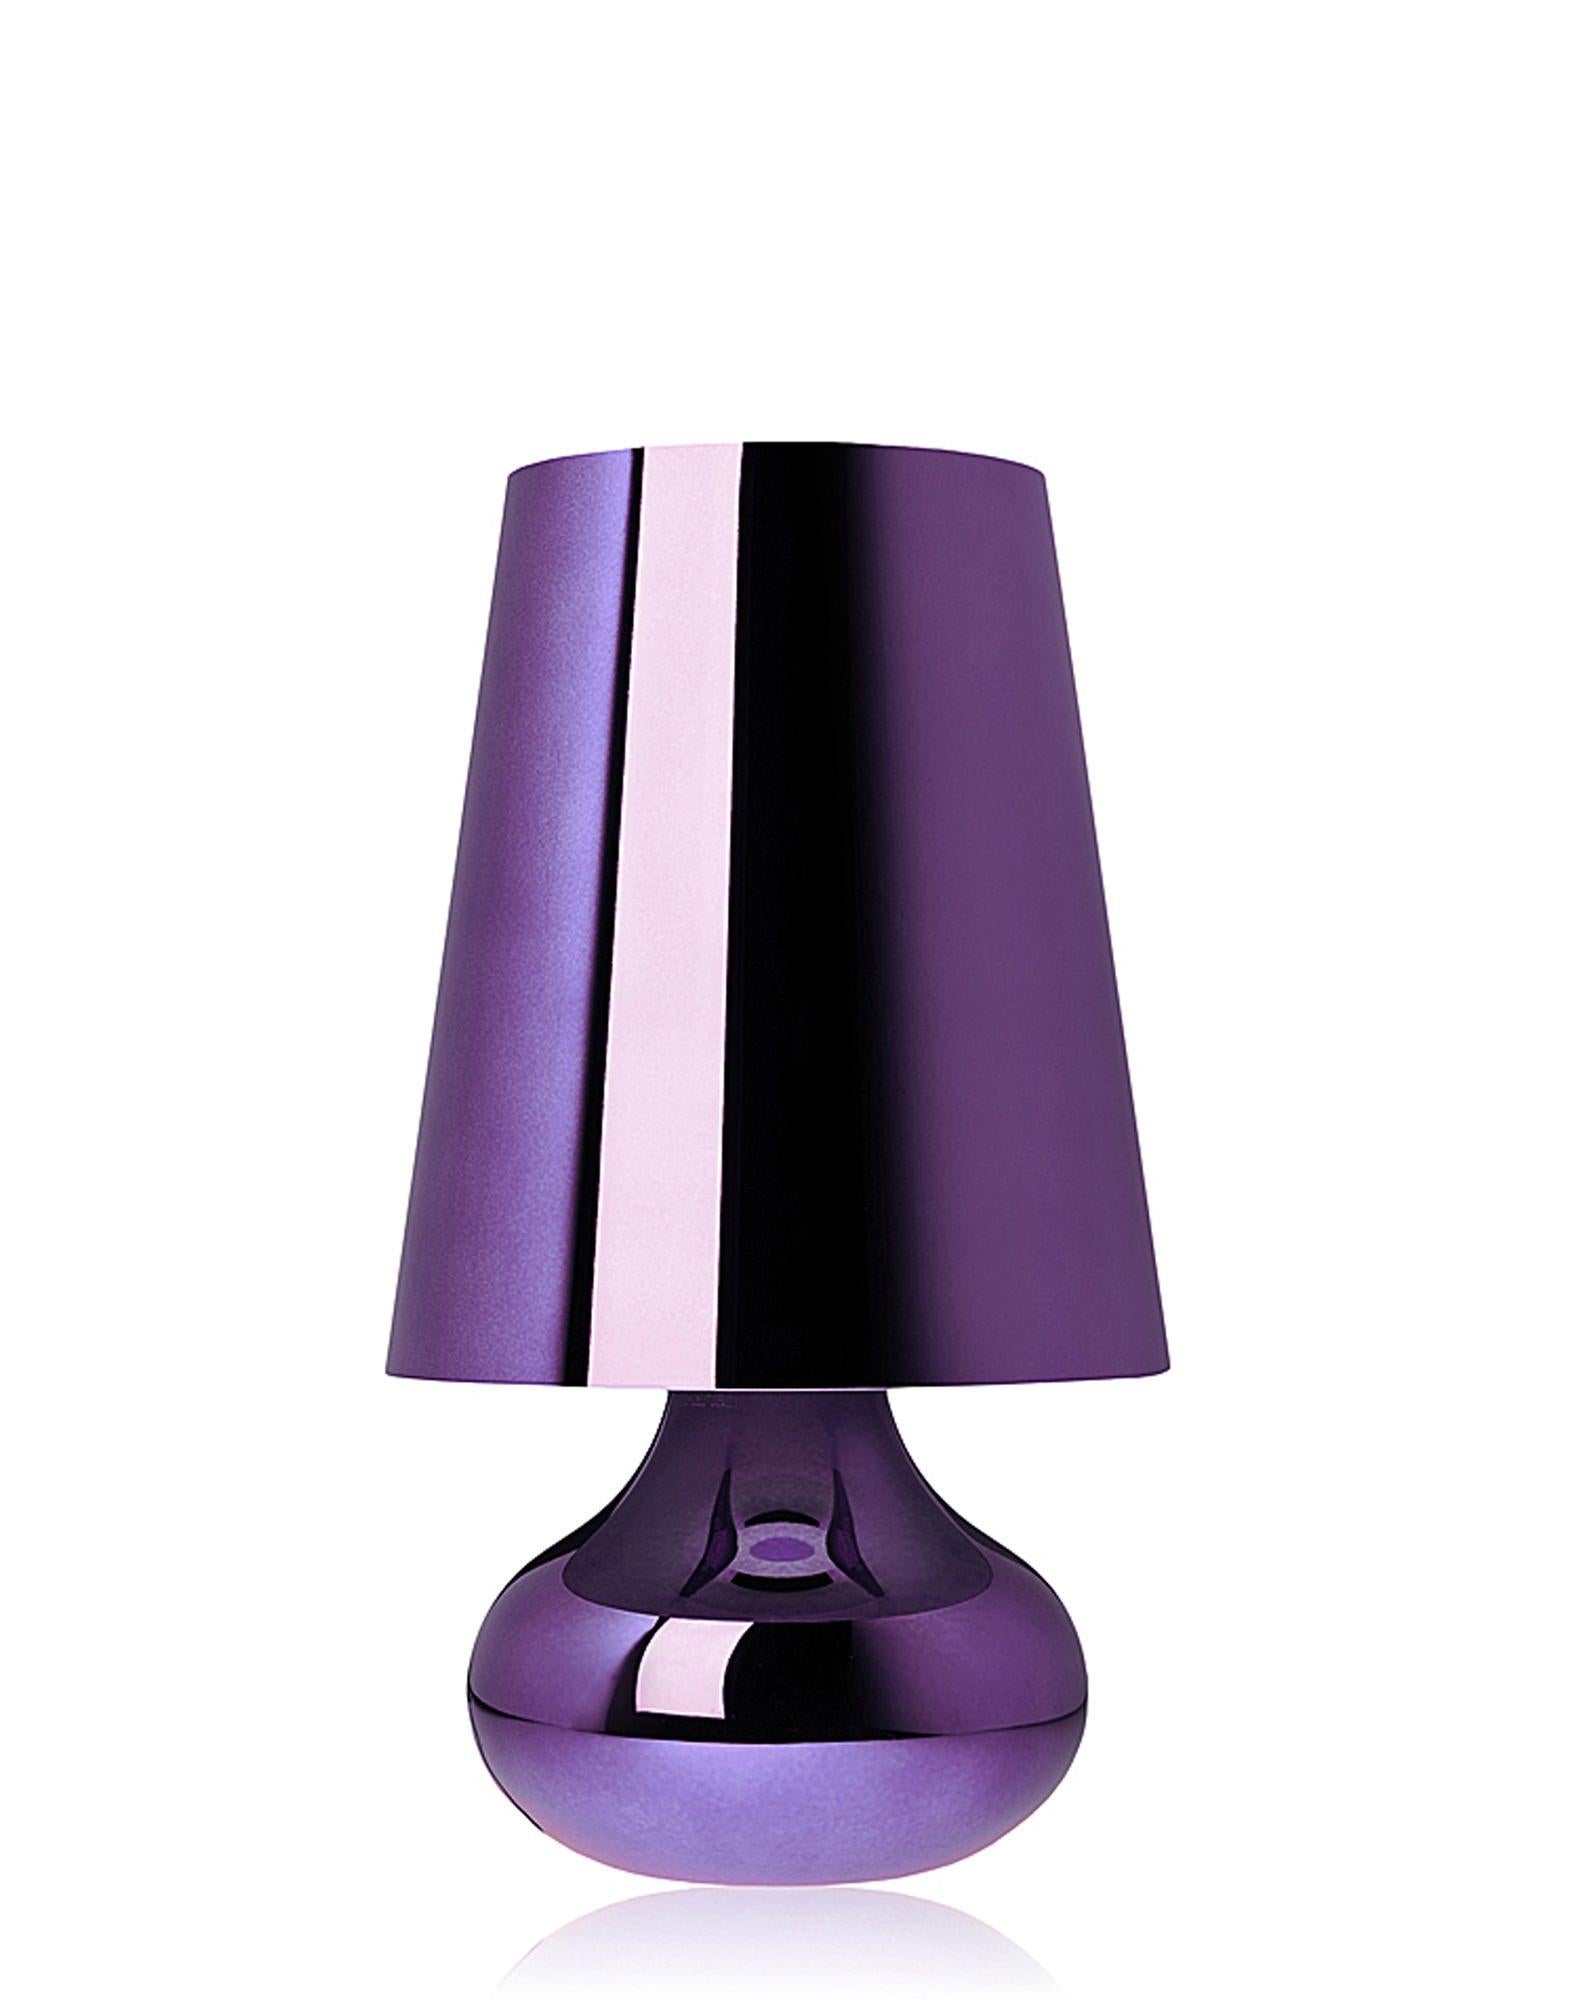 The typical table lamp of the seventies given new form and color. The Cindy lamp with a conical lampshade and rounded teardrop base comes in a broad range of all matte metallic tones. Cindy’s special feature is its shiny chrome-like finish that